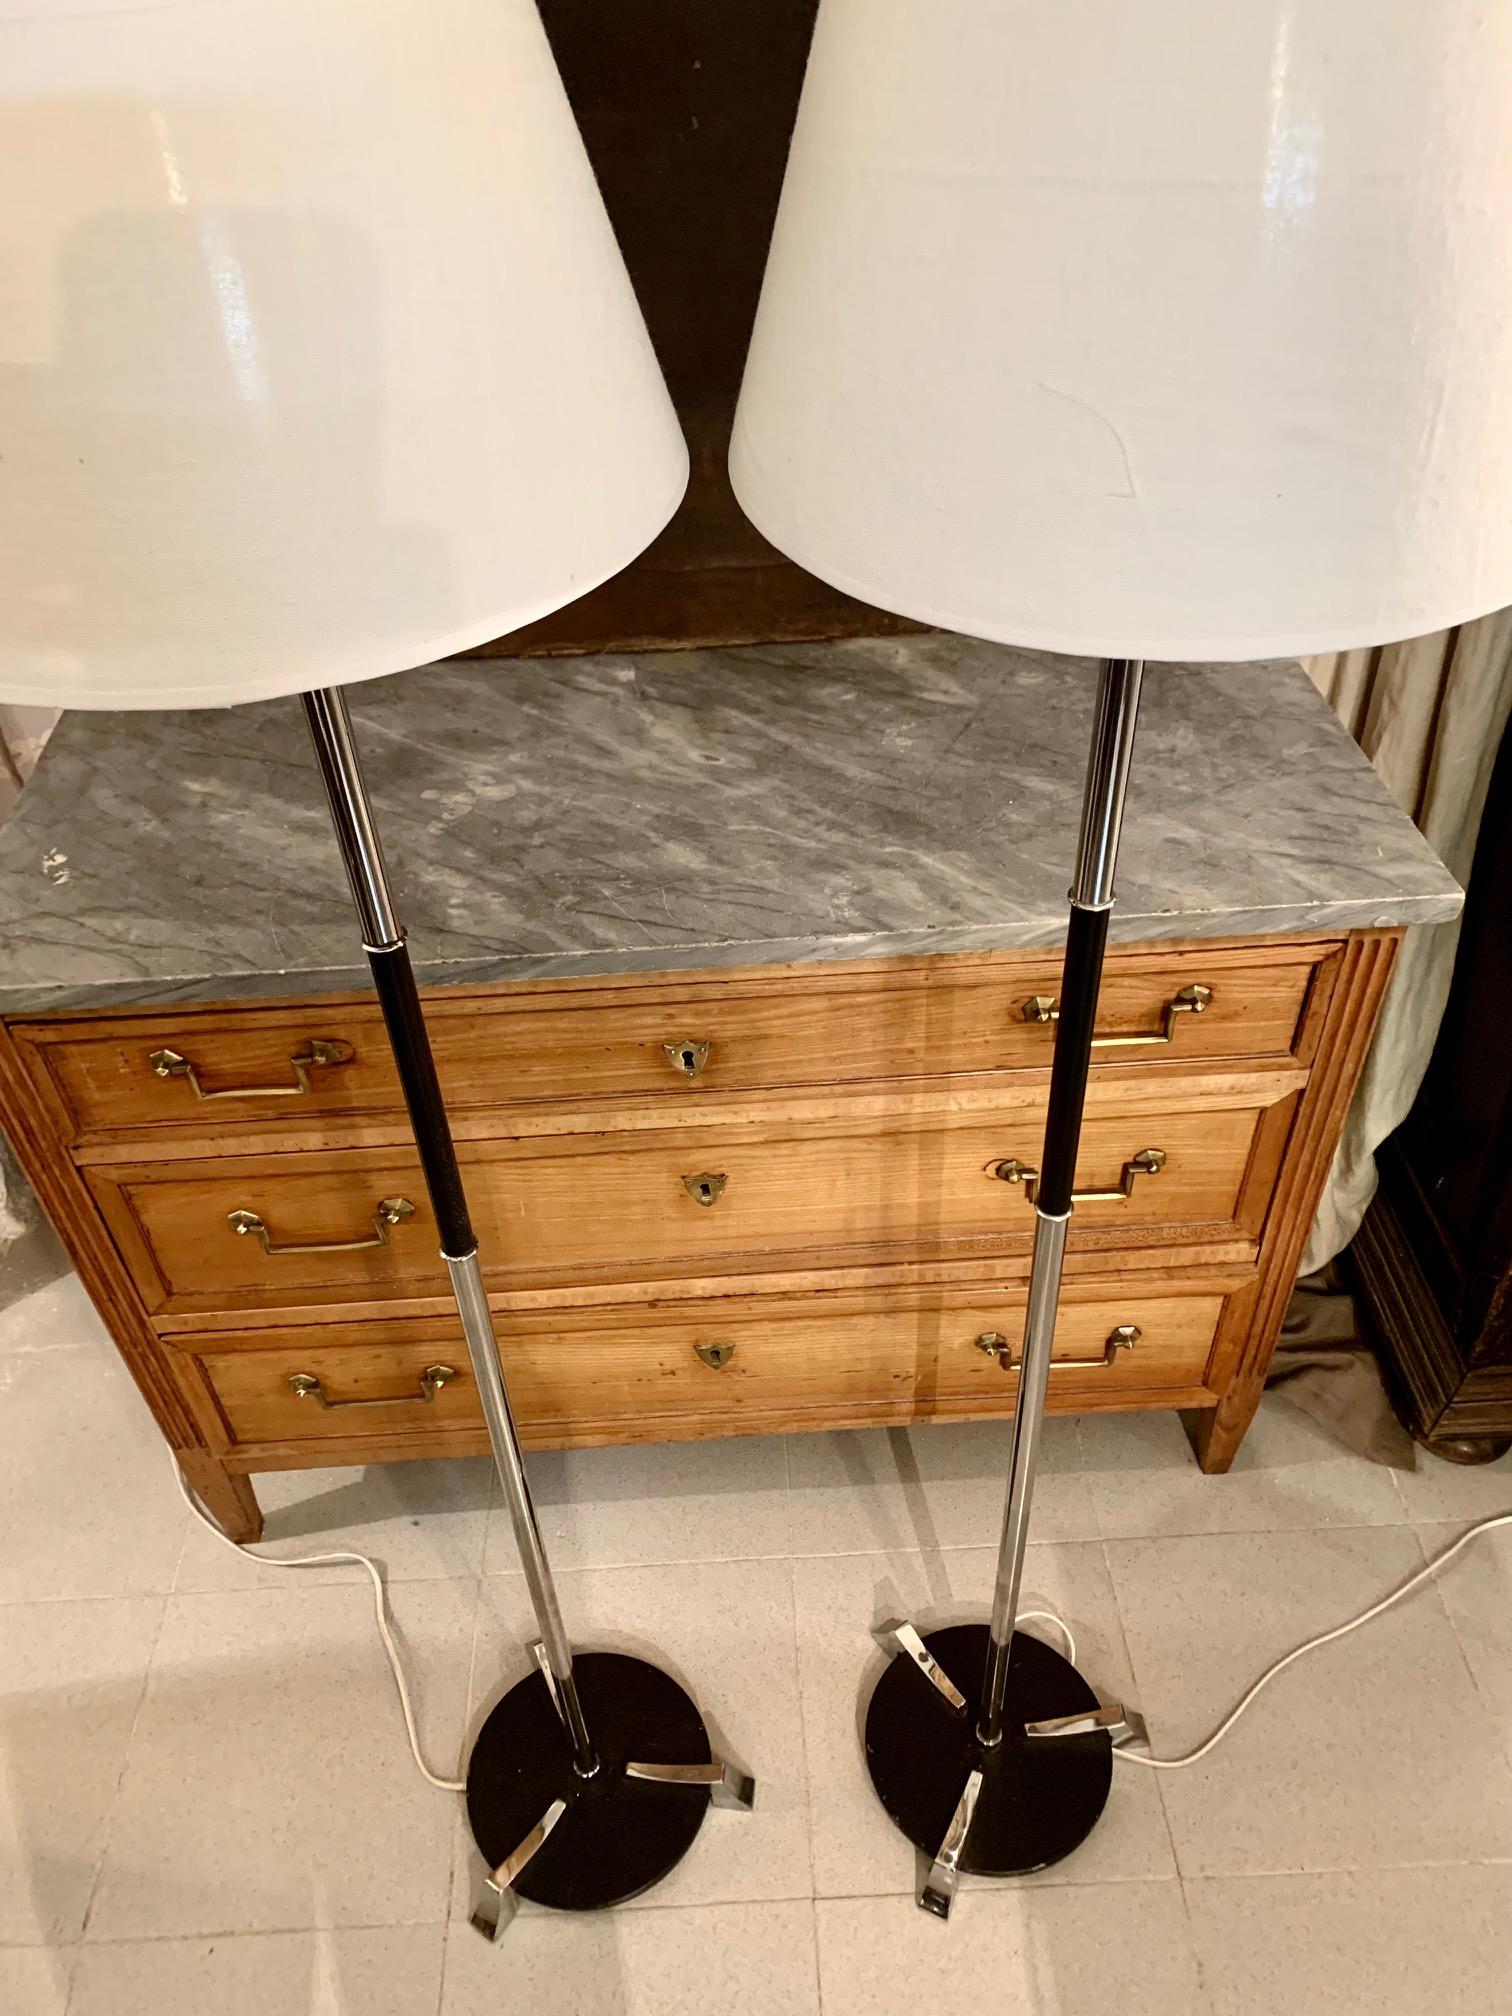 Pair of Spanish floor lamps made of Lacquered and Chromed metal in the 70s, the base of the lamp is with three chrome feet on a black lacquered circular base, lampshades in White satin fabric